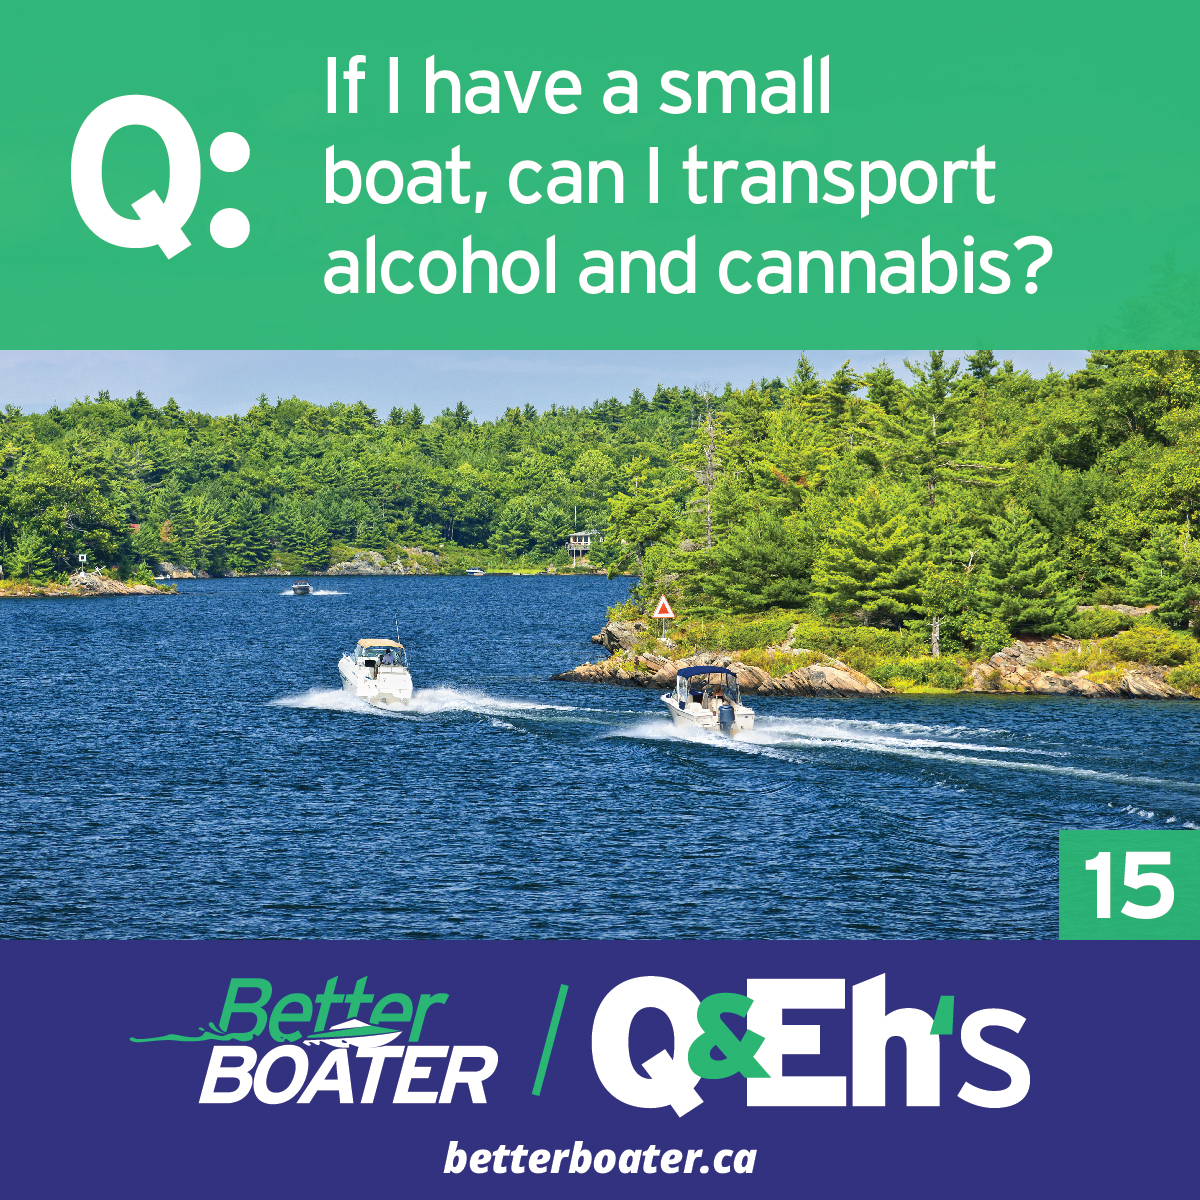 https://betterboater.ca/Transport%20Alcohol%20Cannabis